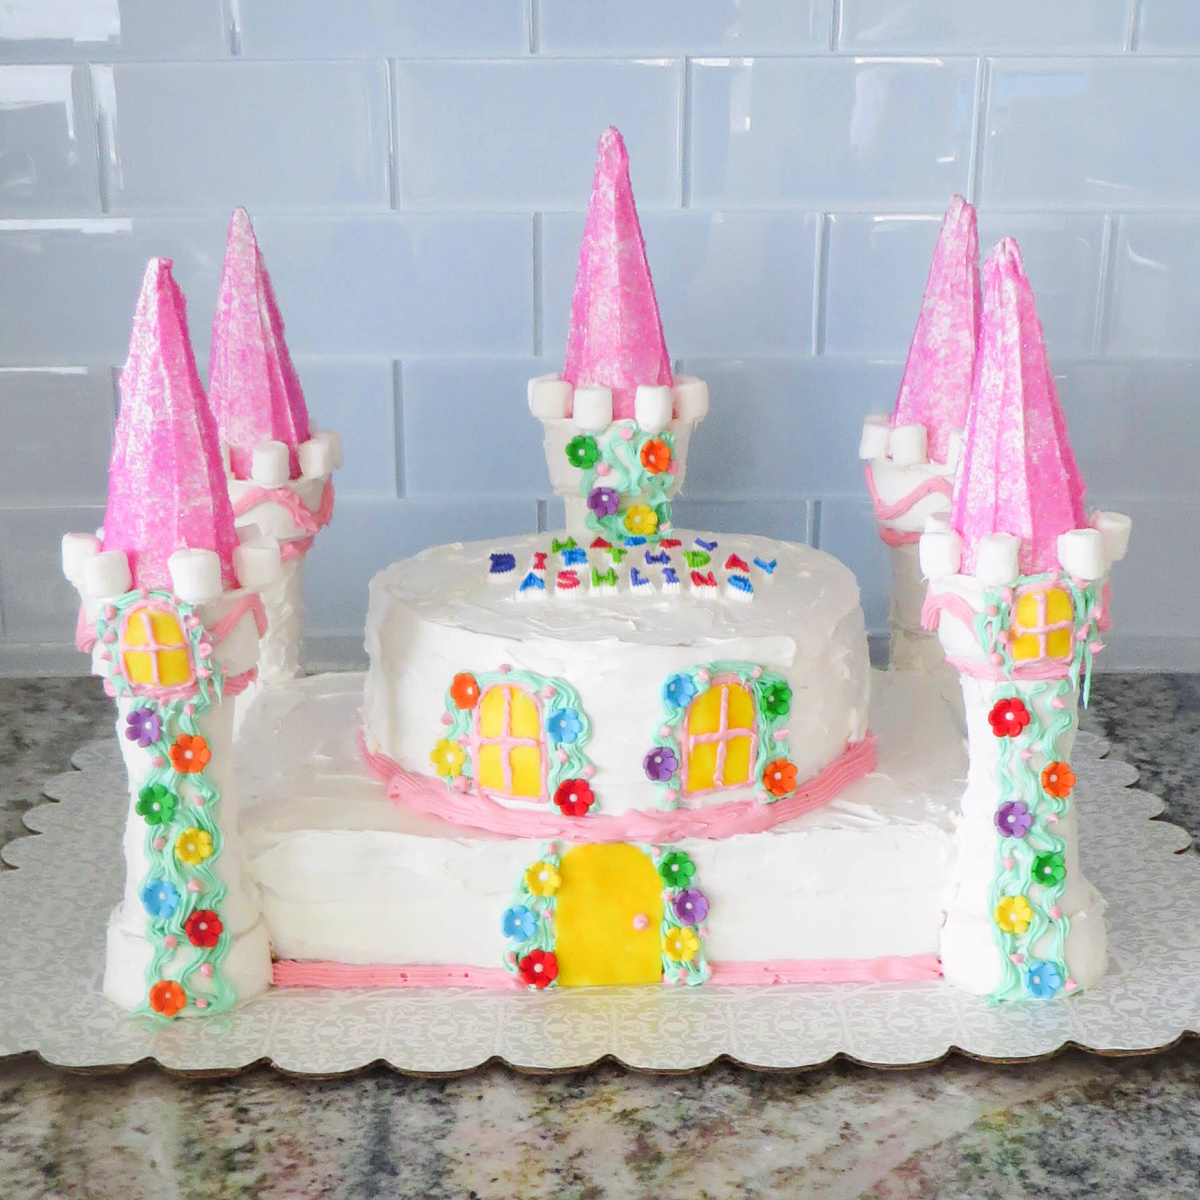 A colorful castle-themed birthday cake with pink towers and decorative candy elements on a kitchen counter.